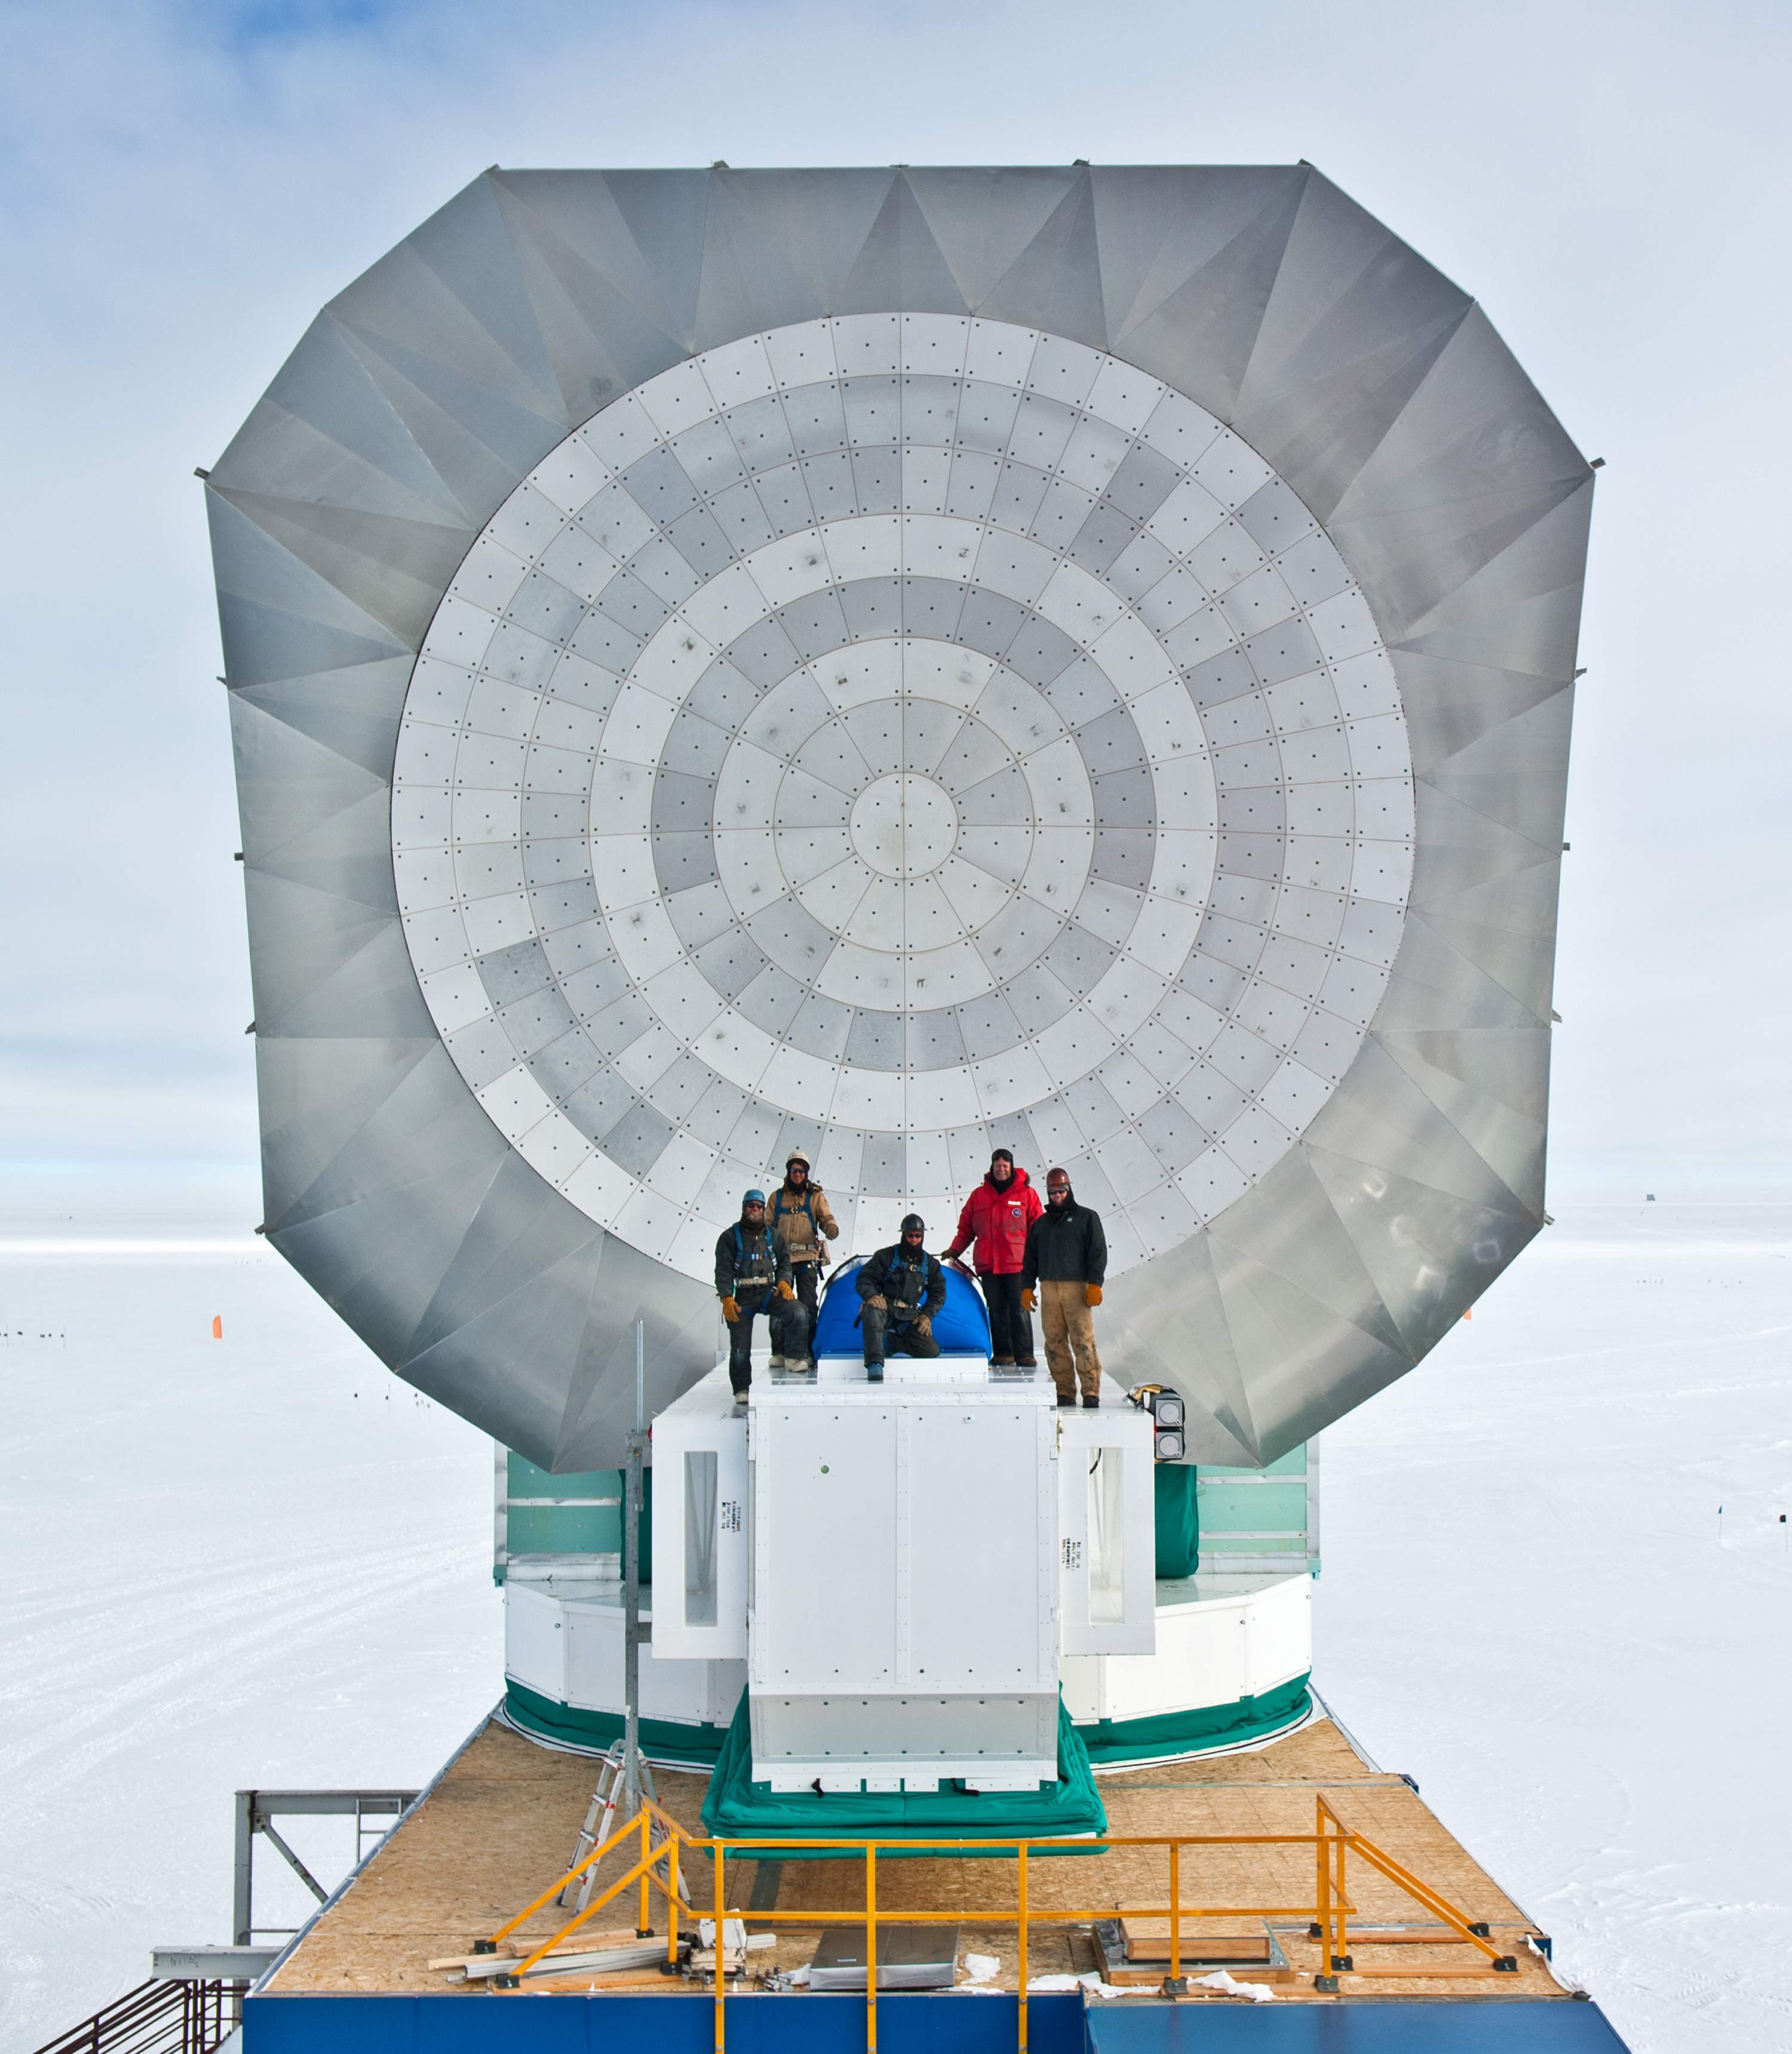 Five men in front of a parabolic dish.